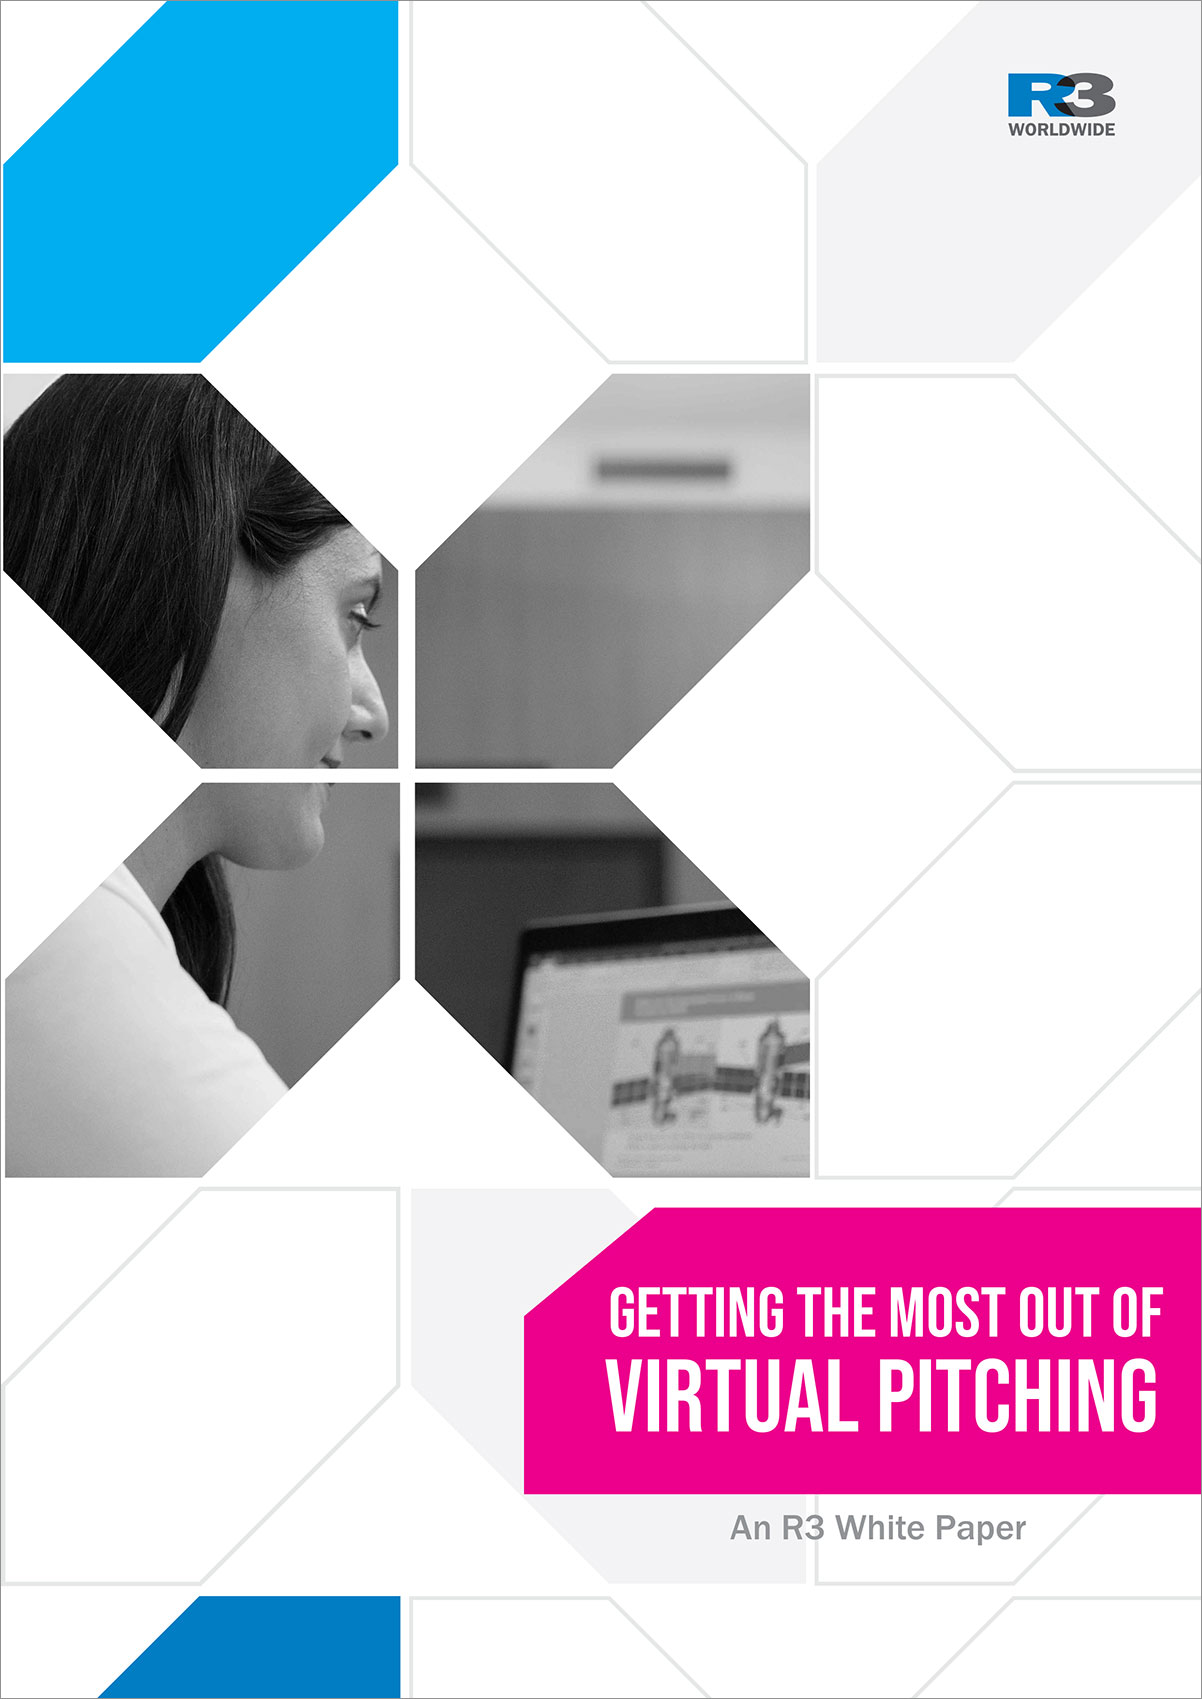 Getting the Most Out of Virtual Pitching